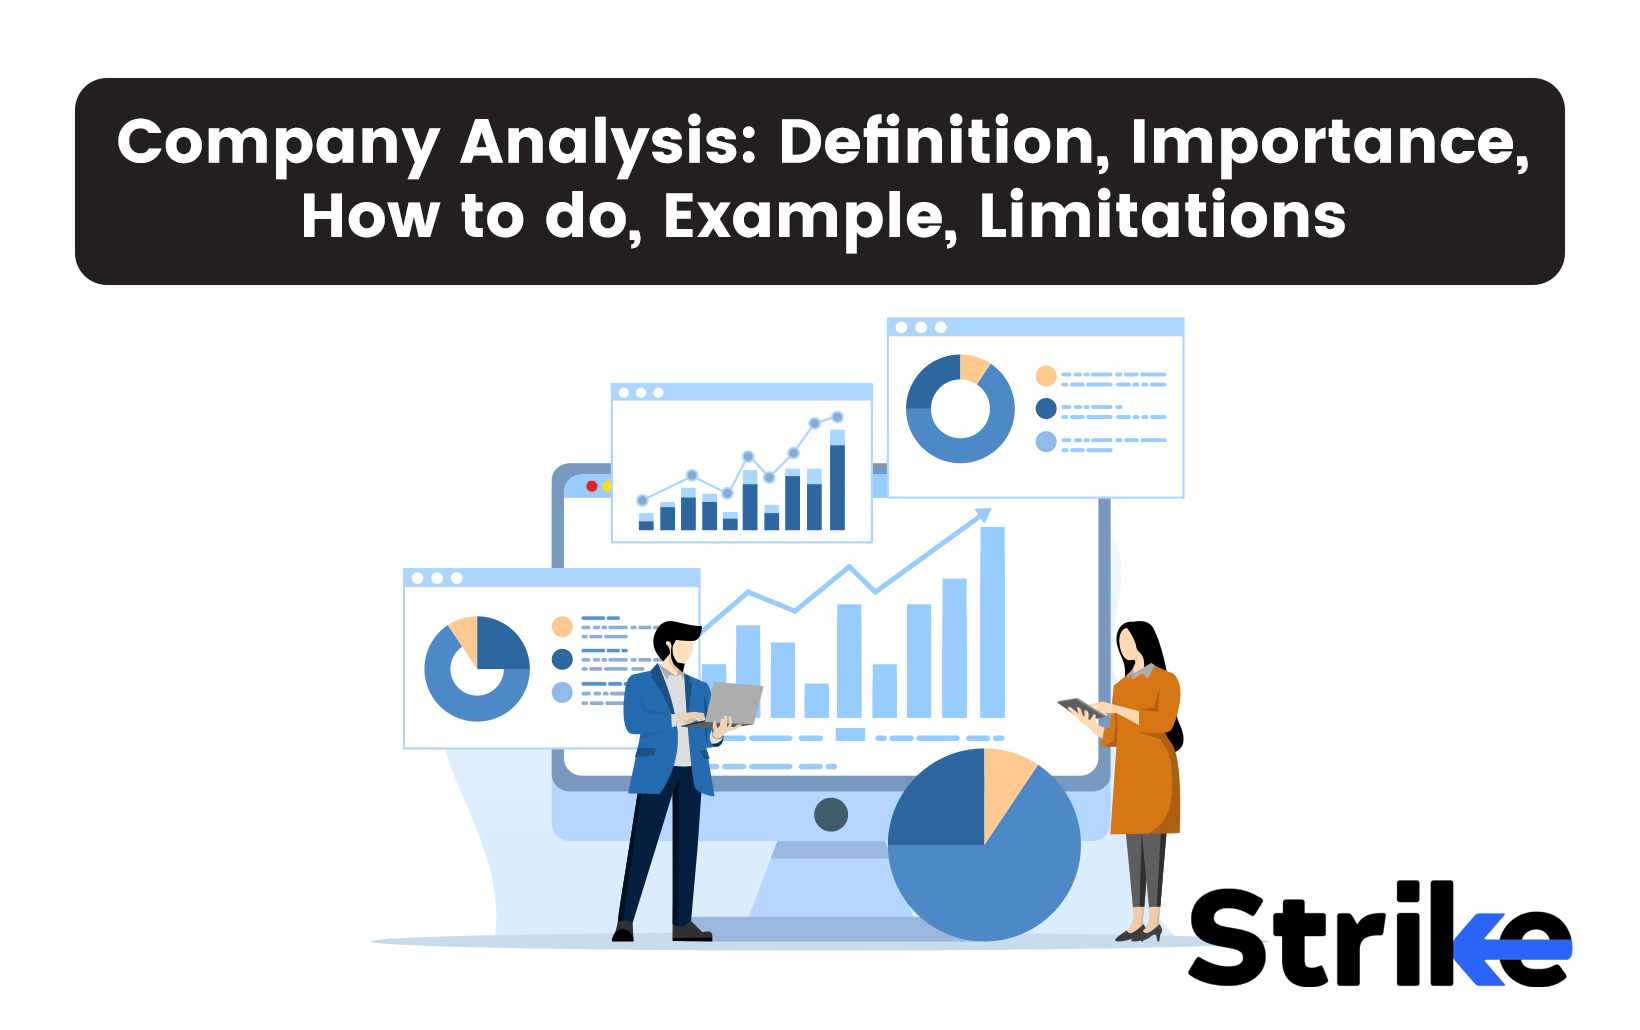 Company Analysis: Definition, Importance, How to do, Example, Limitations